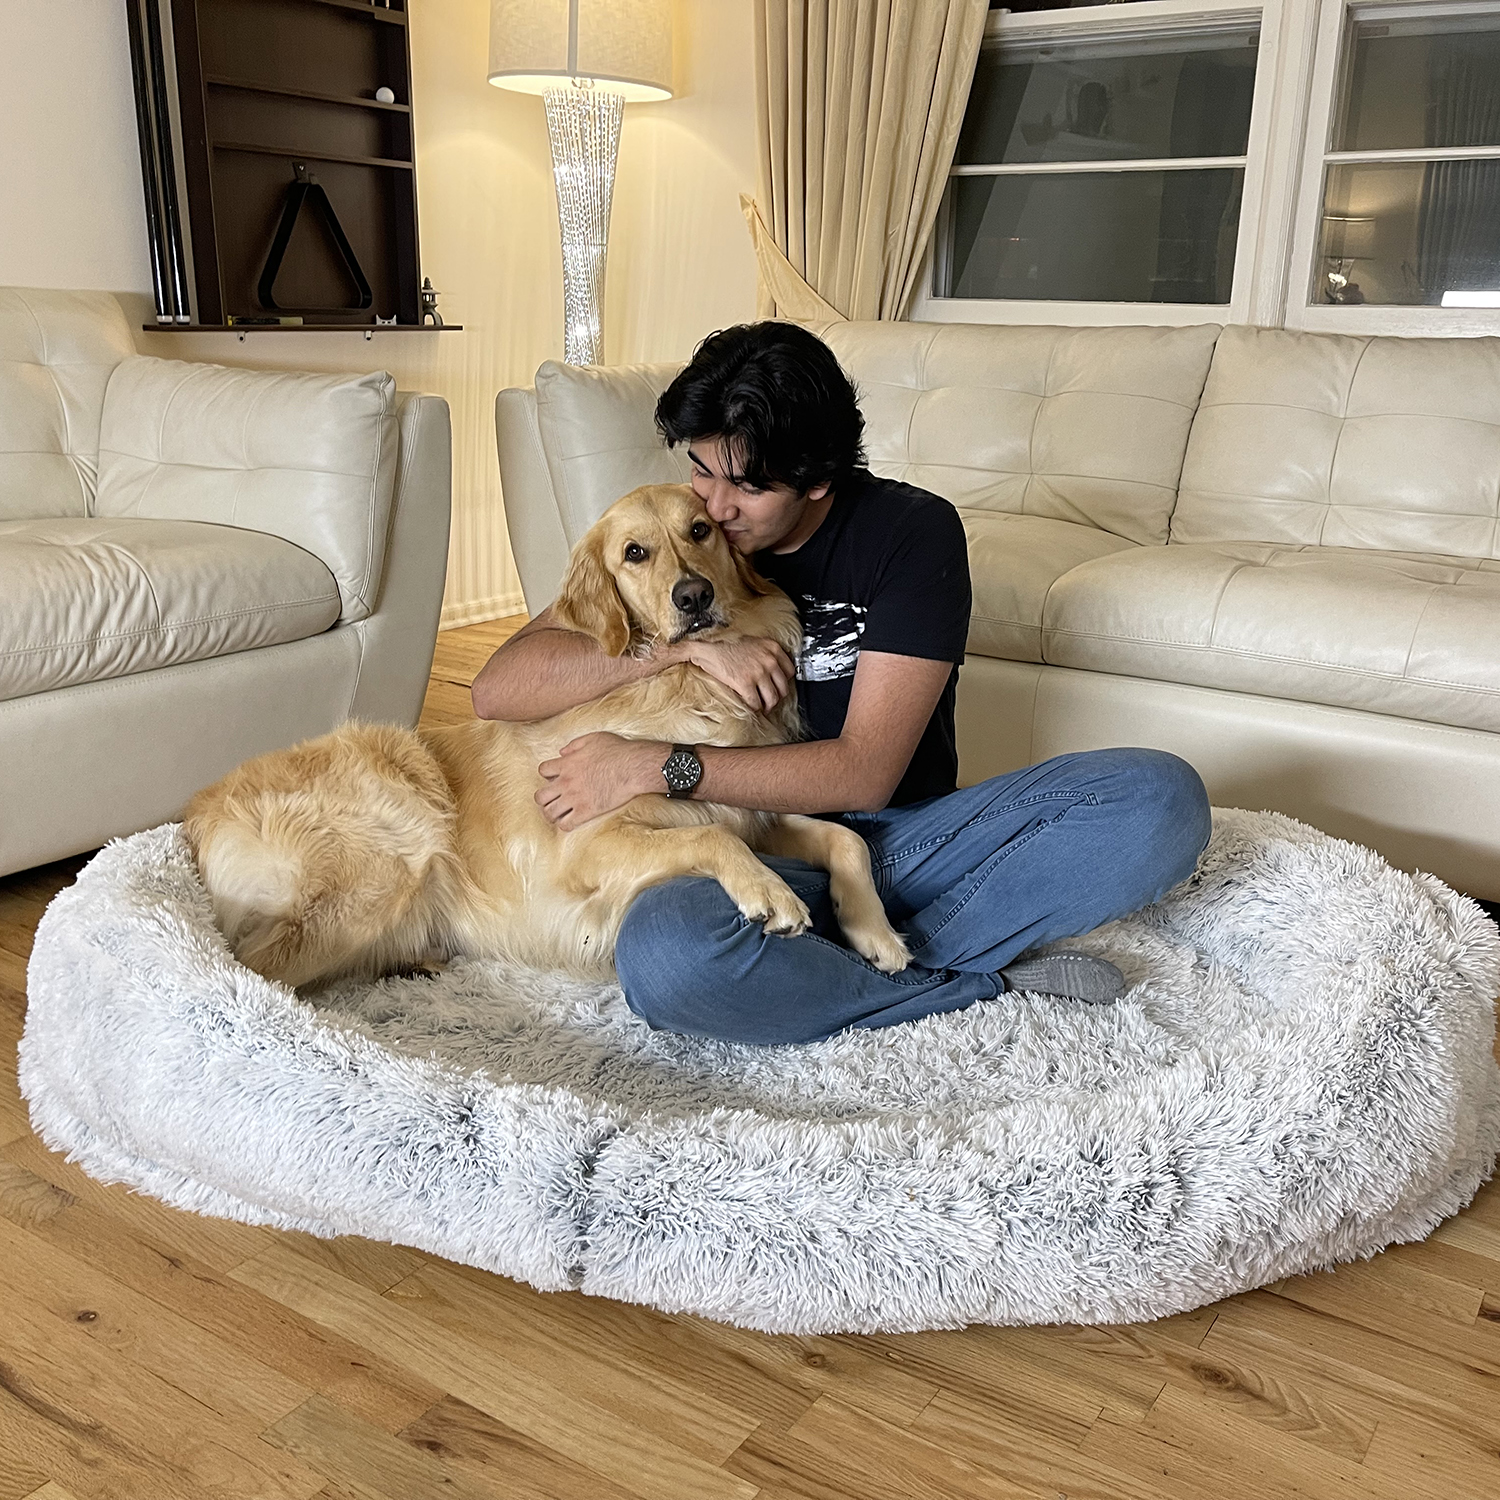 

Bed, 69" X 36" X 10" Giant Dog Bed For Adult And Pets, Large Animal And Human Bed, Anti-slip And Memory Foam